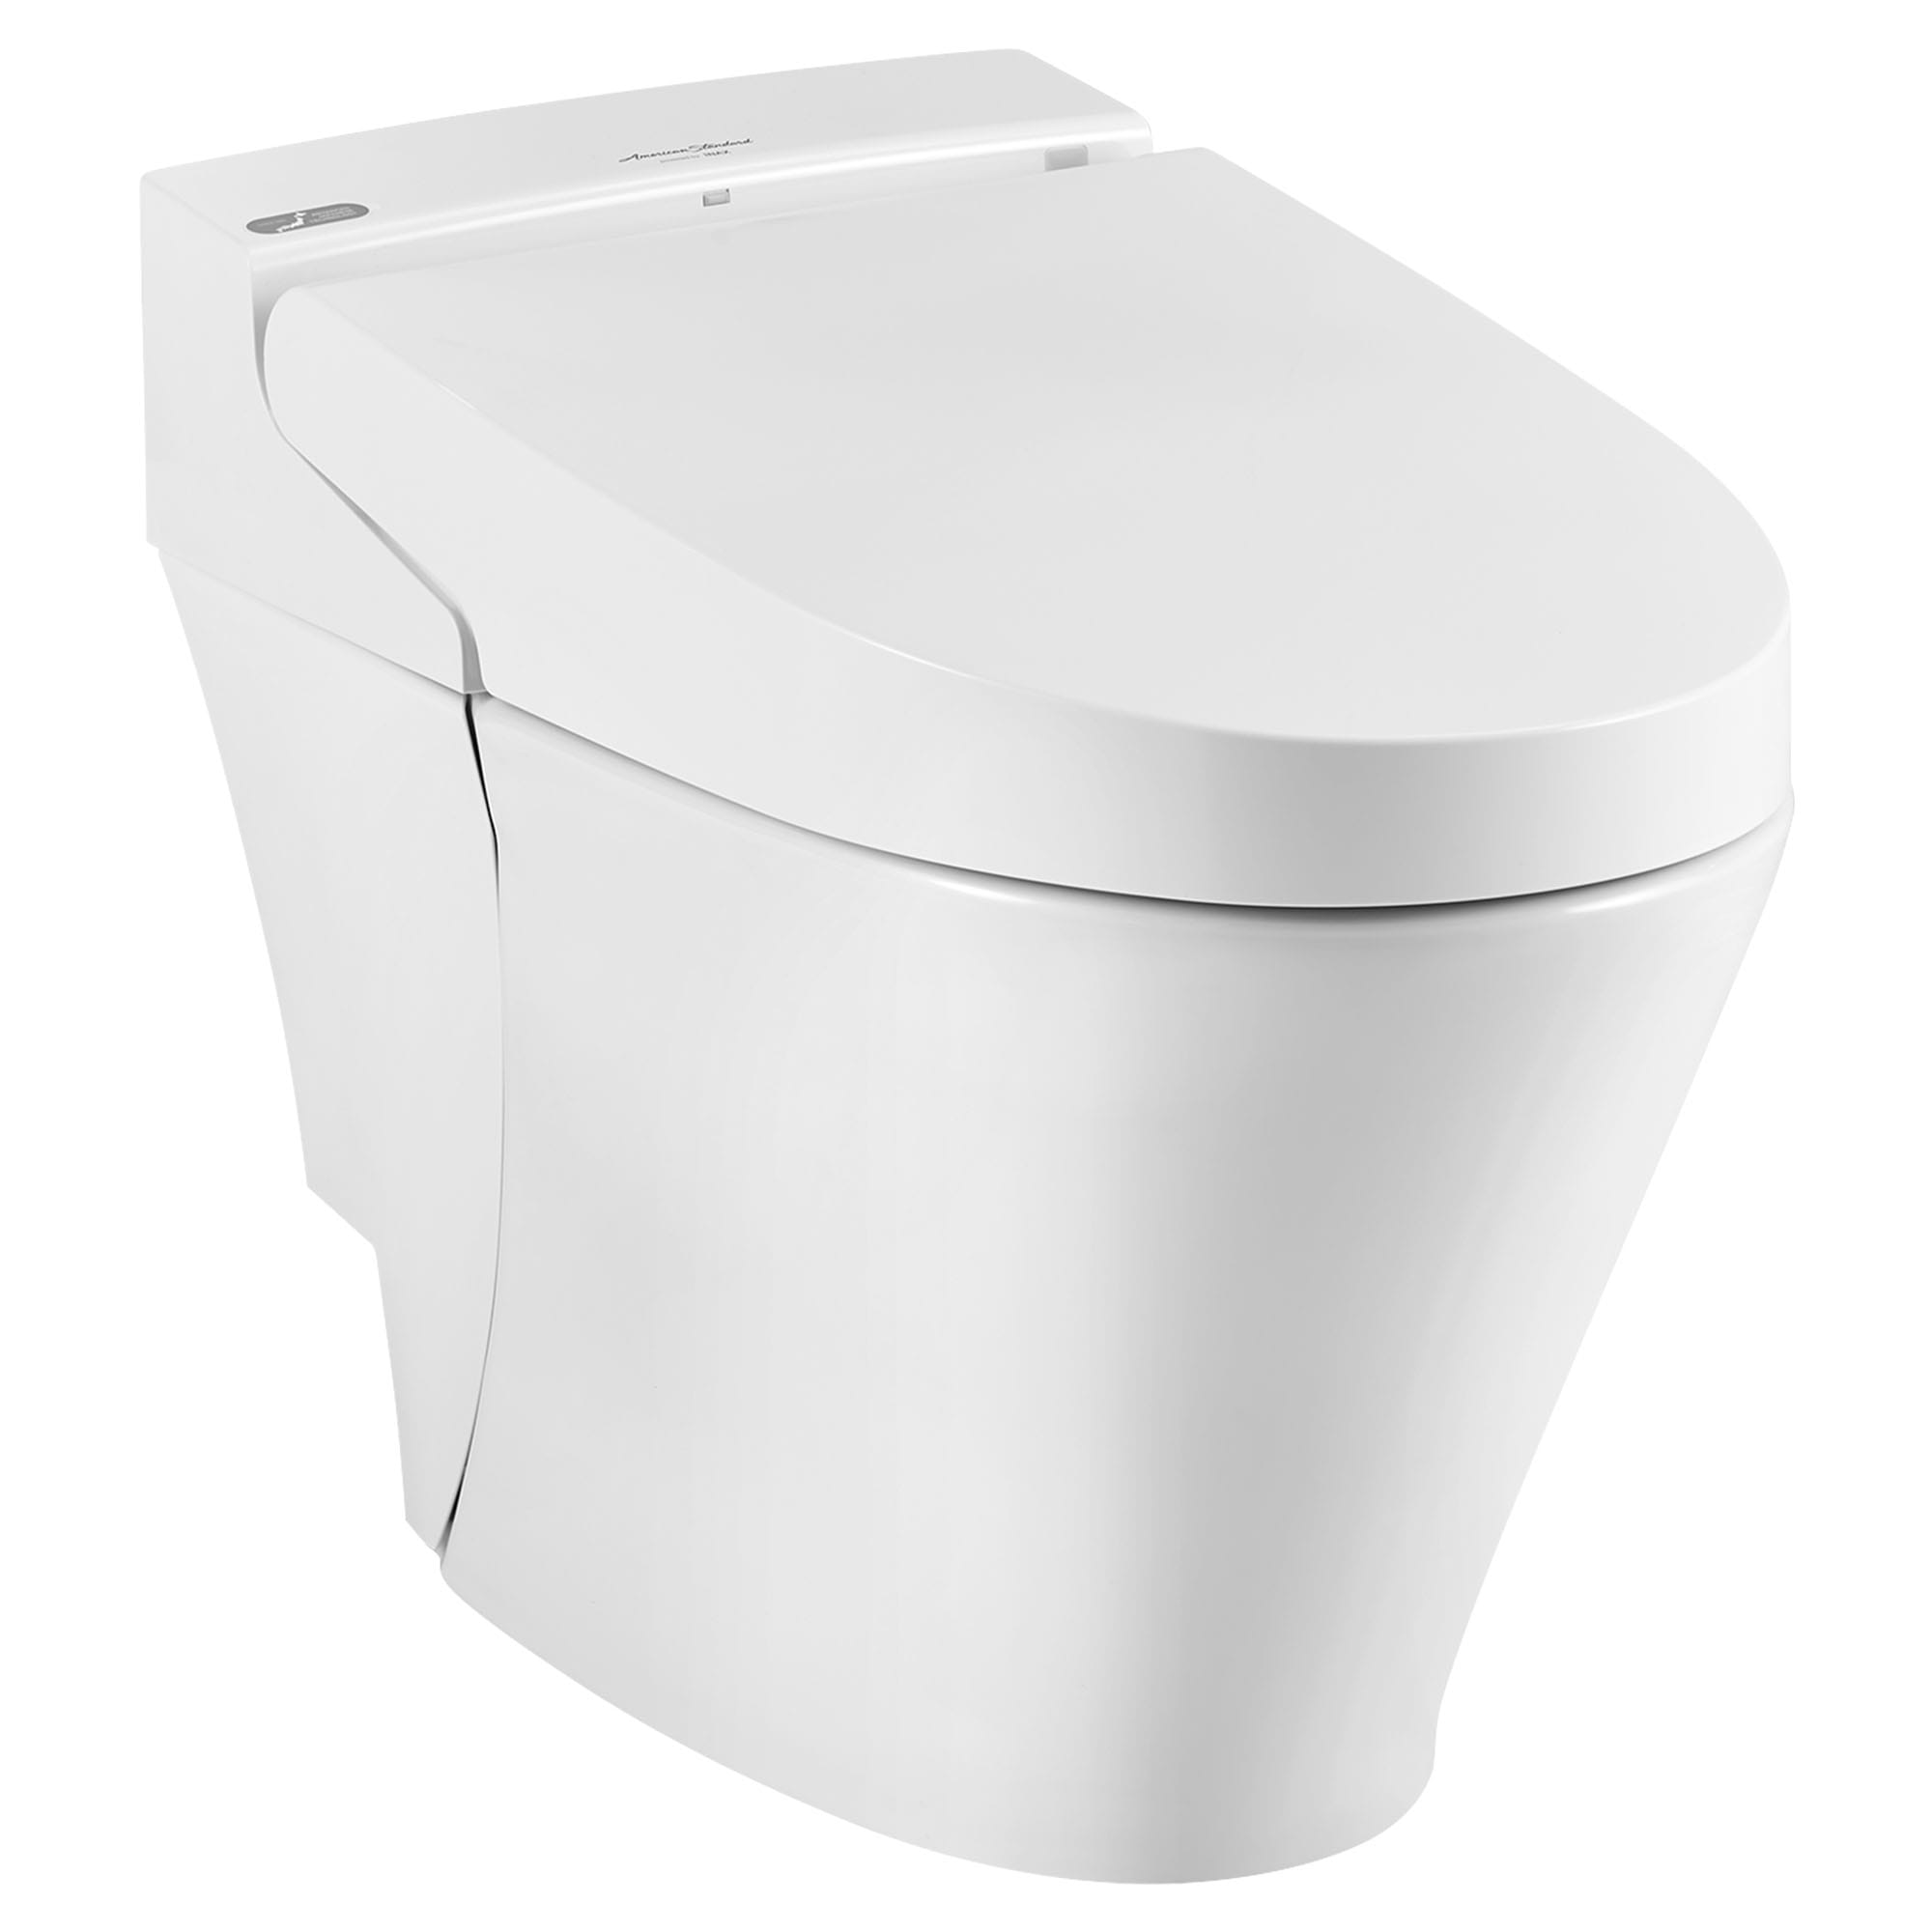 Toilette SpaLet Advanced Clean 100 Chasse double WaterSenseMD 1,32 – 0,92 gpc /4,9 – 3,4 lpc